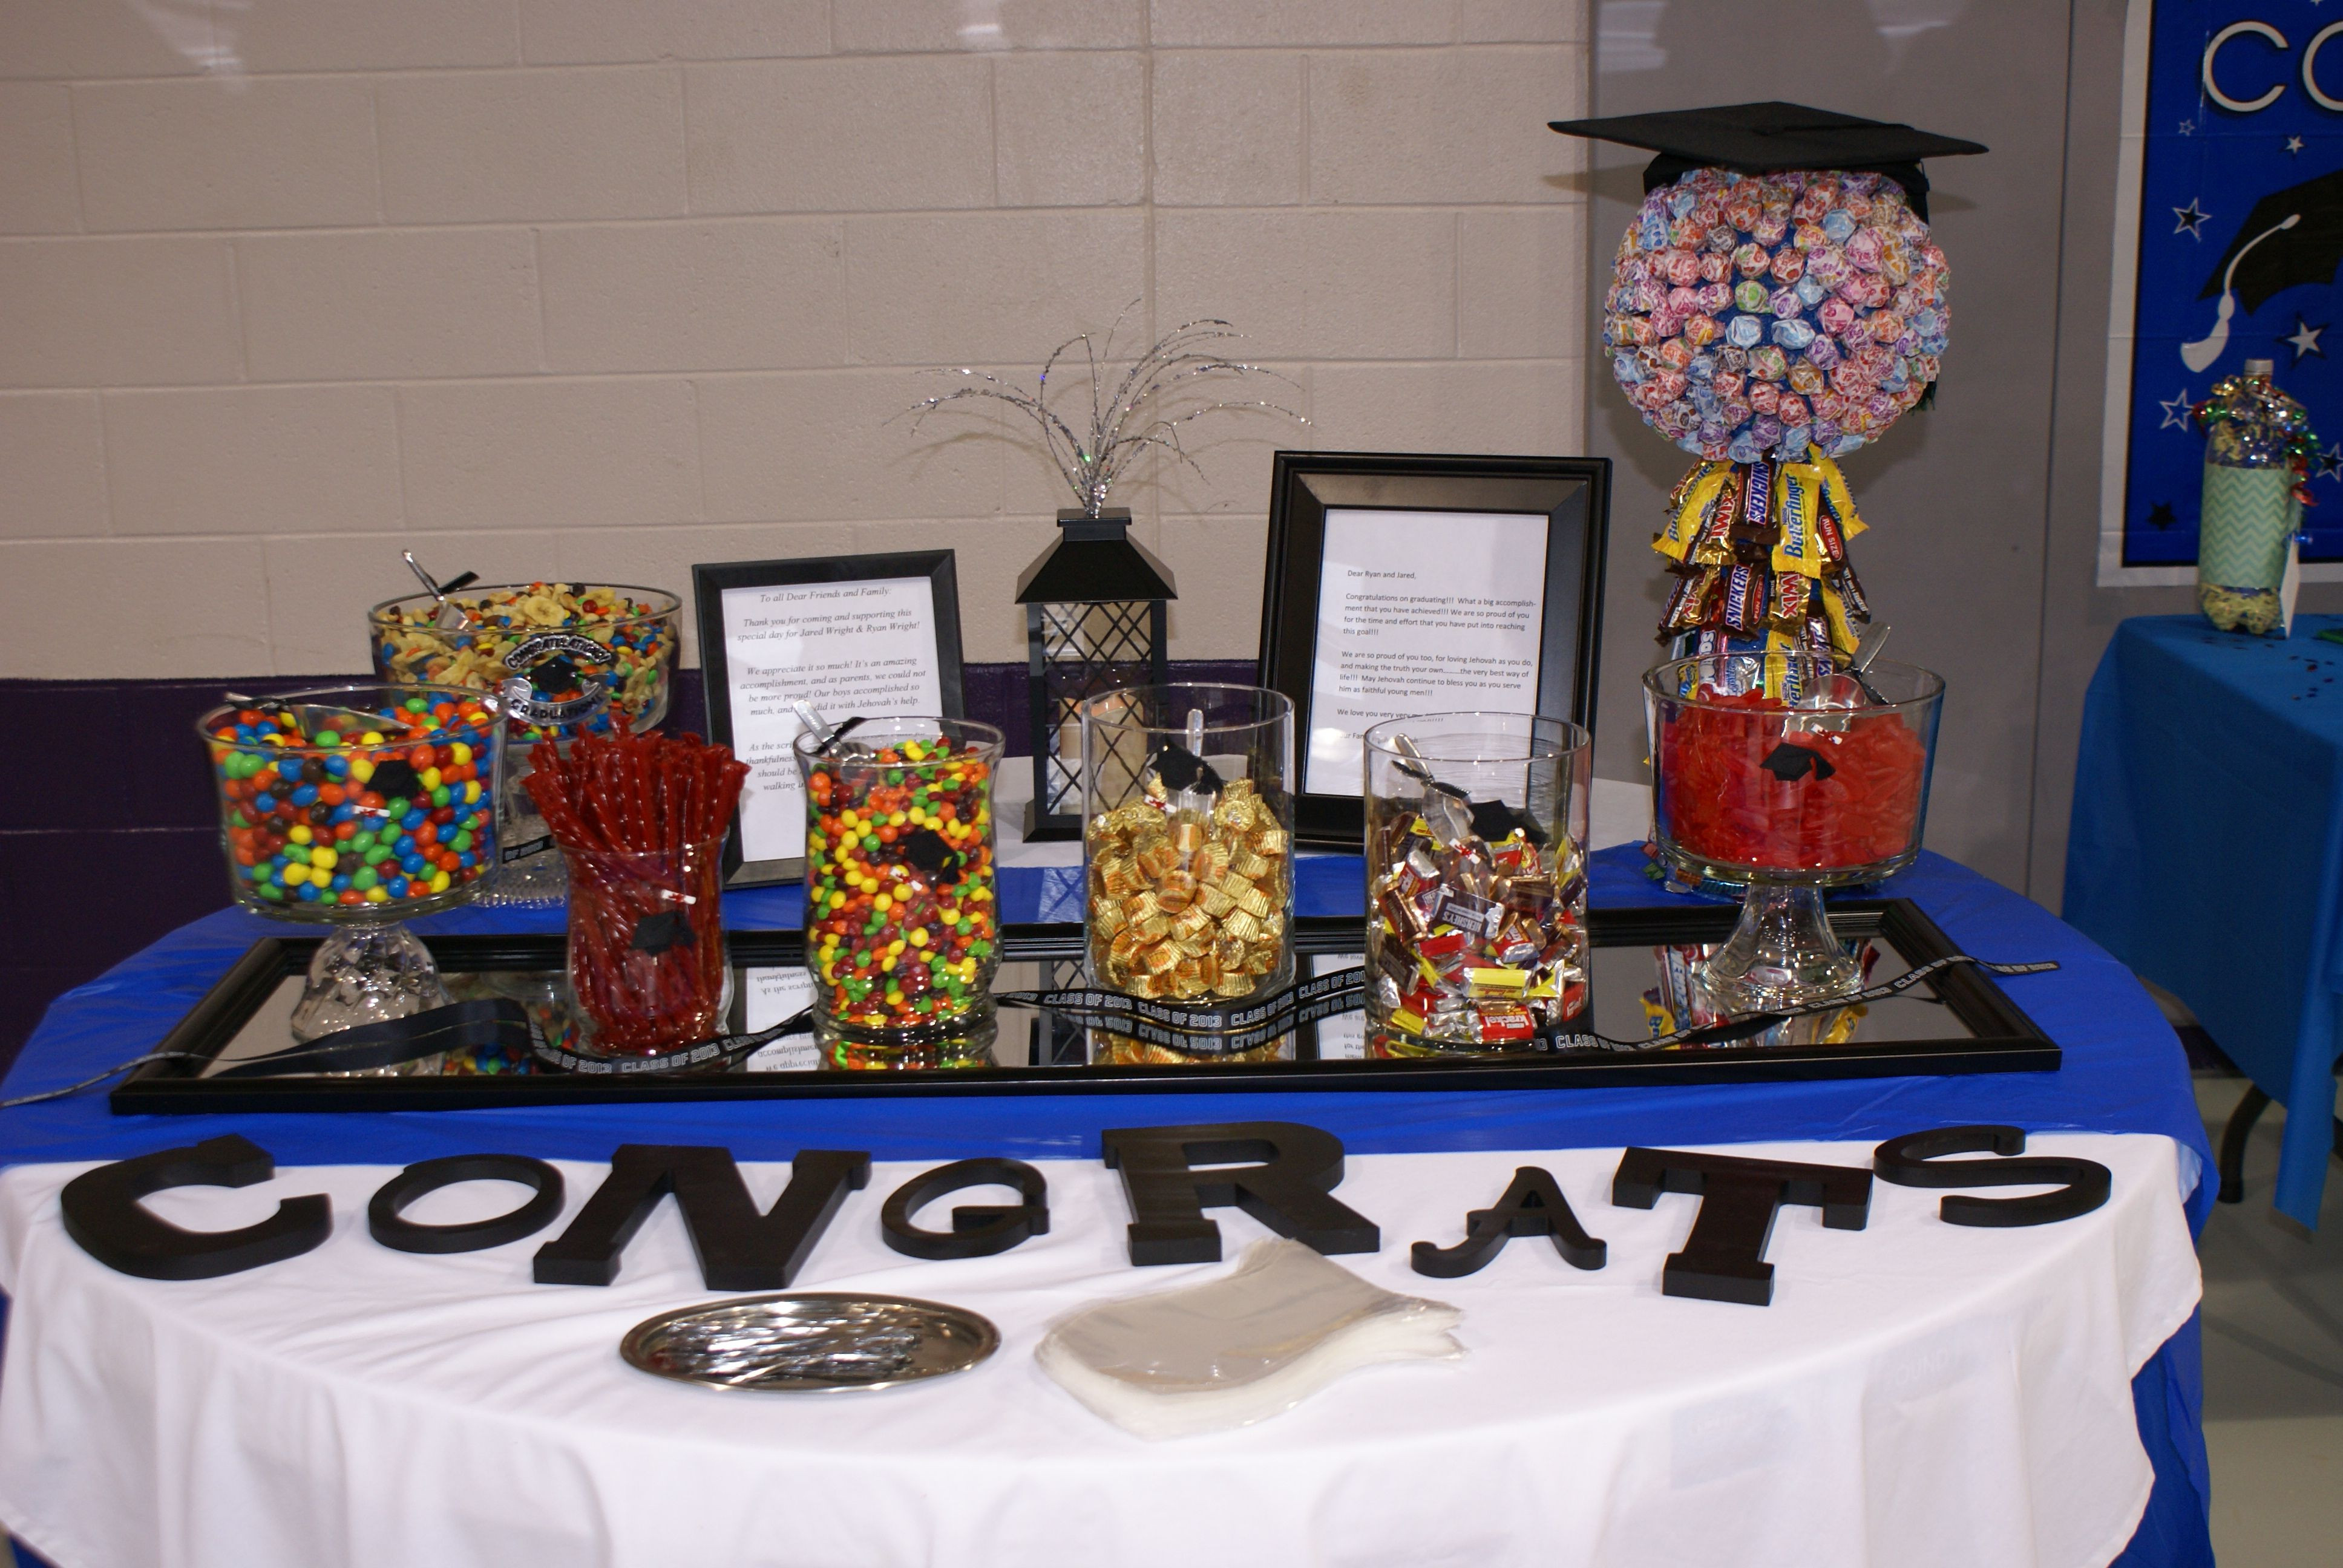 Graduation Party Candy Table Ideas
 Another thing I did for son s senior grad party "candy